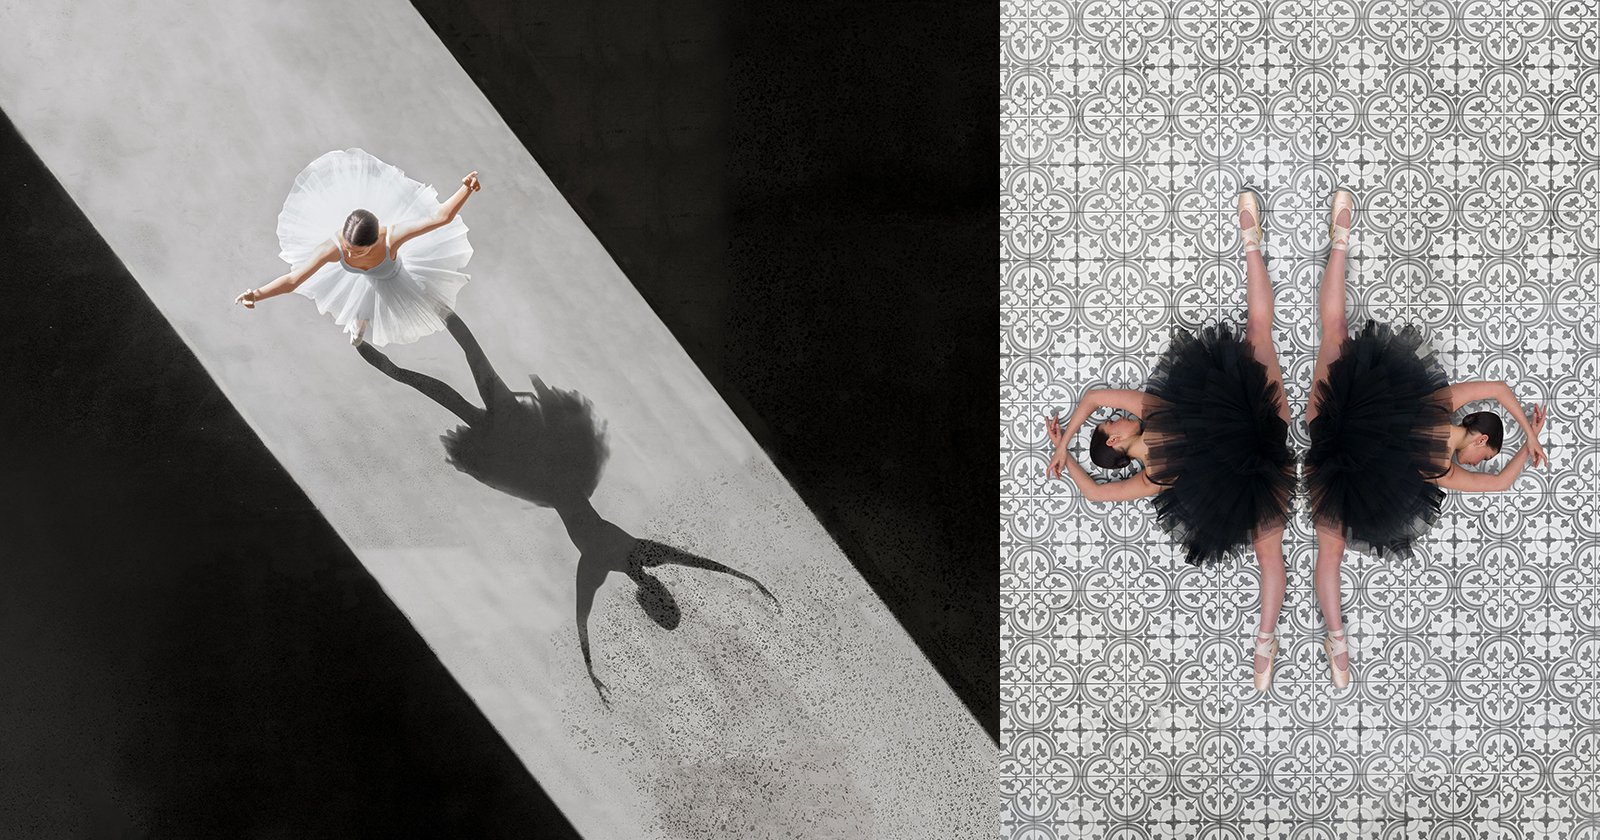 Stunning Drone Photos Capture the Beauty of Ballet from Above